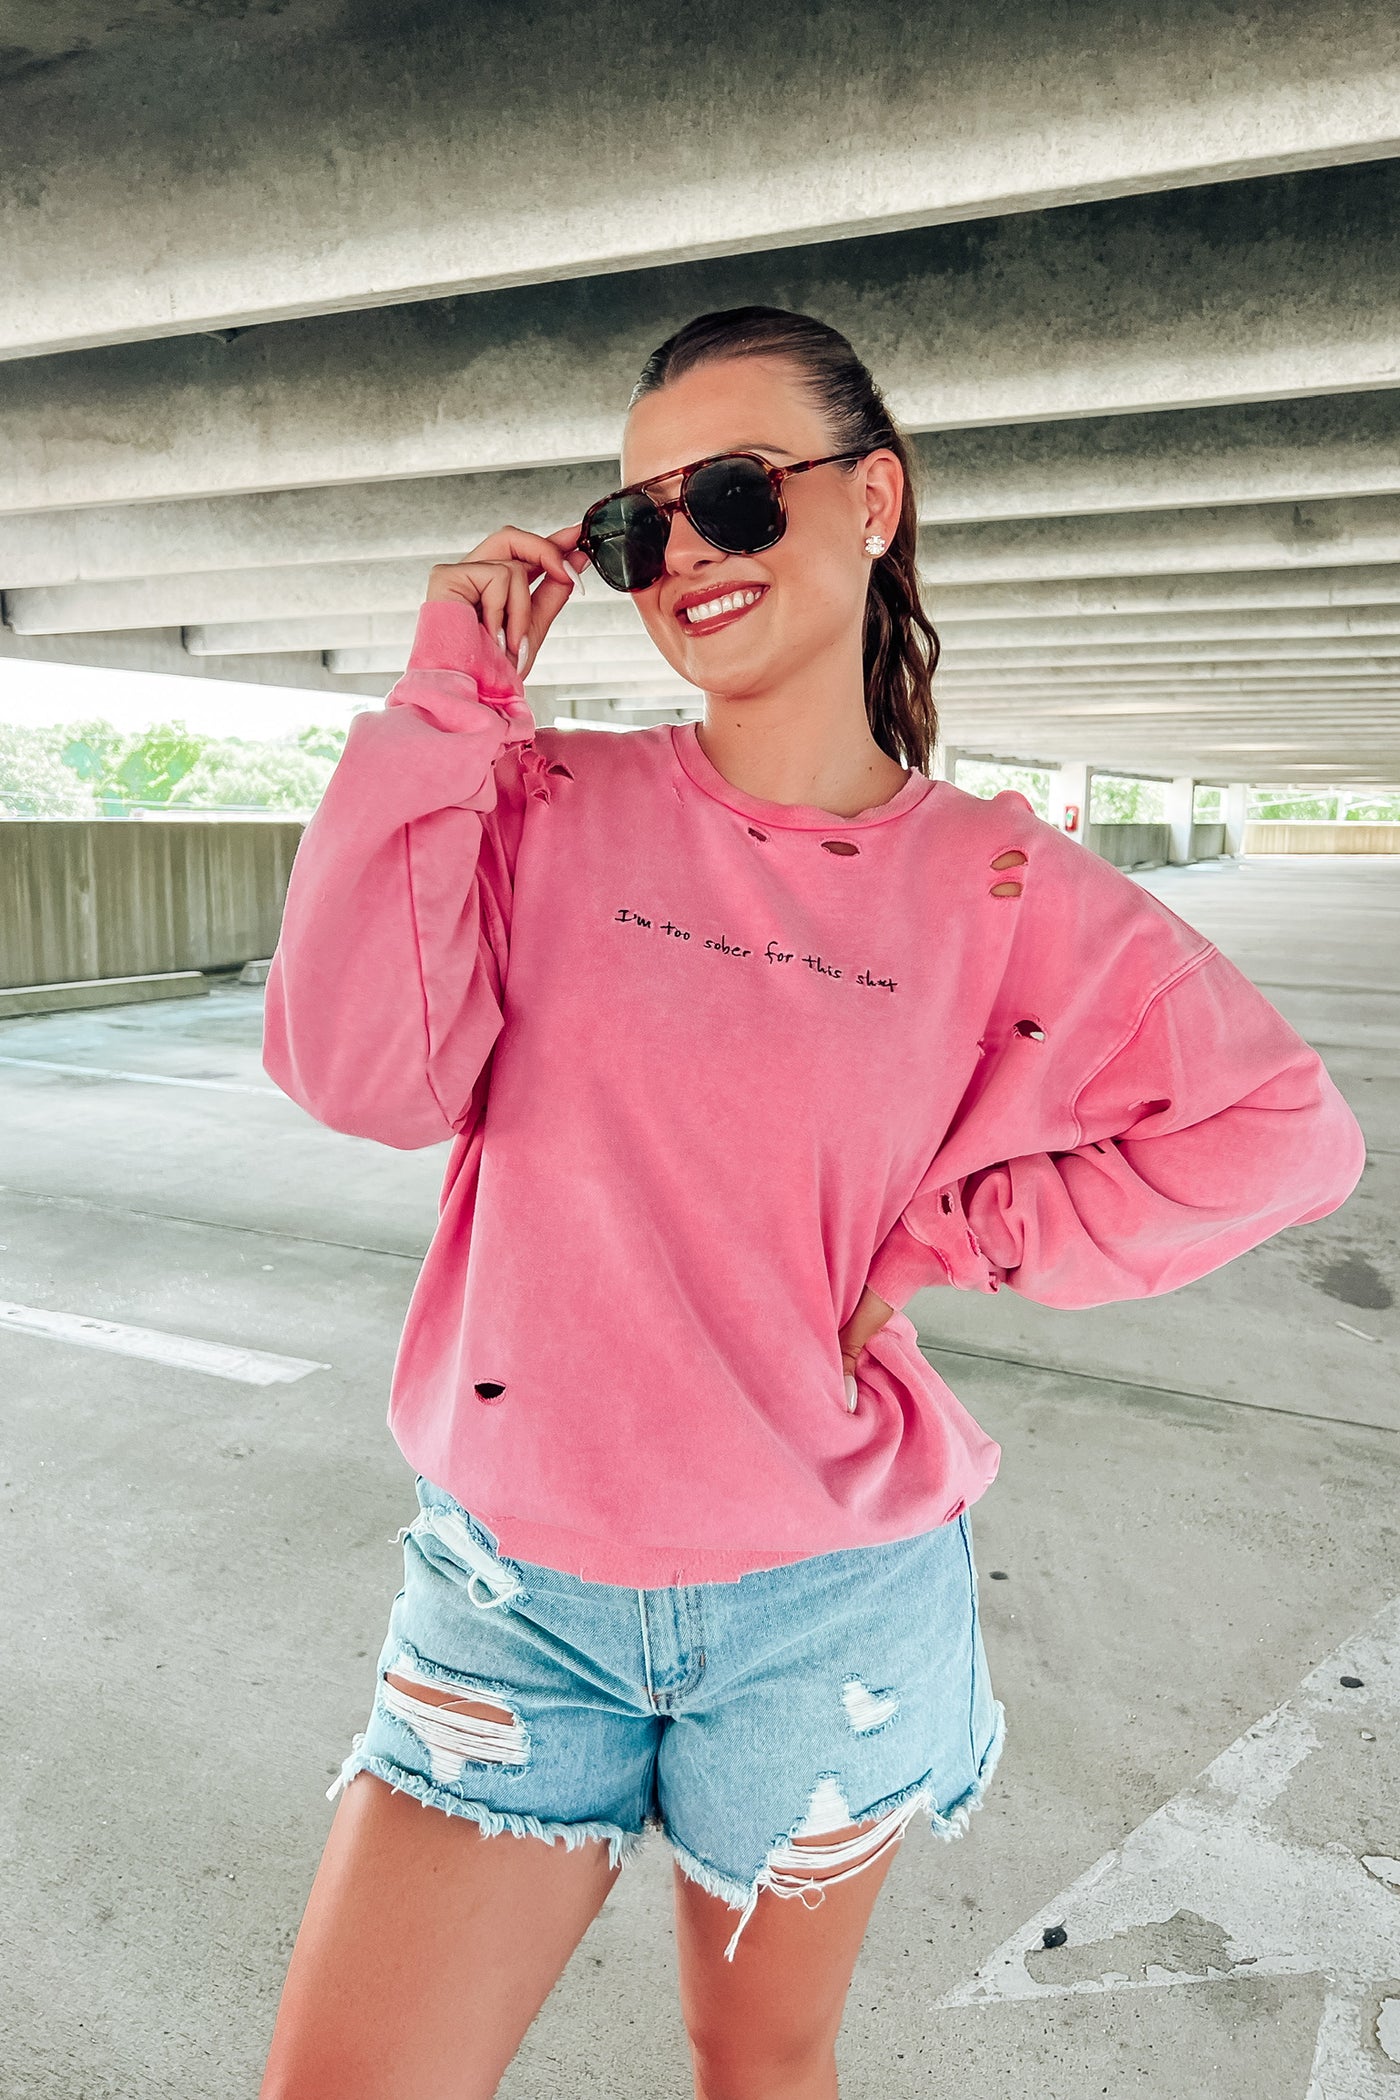 Distressed Sweater With Embroidered Verbiage